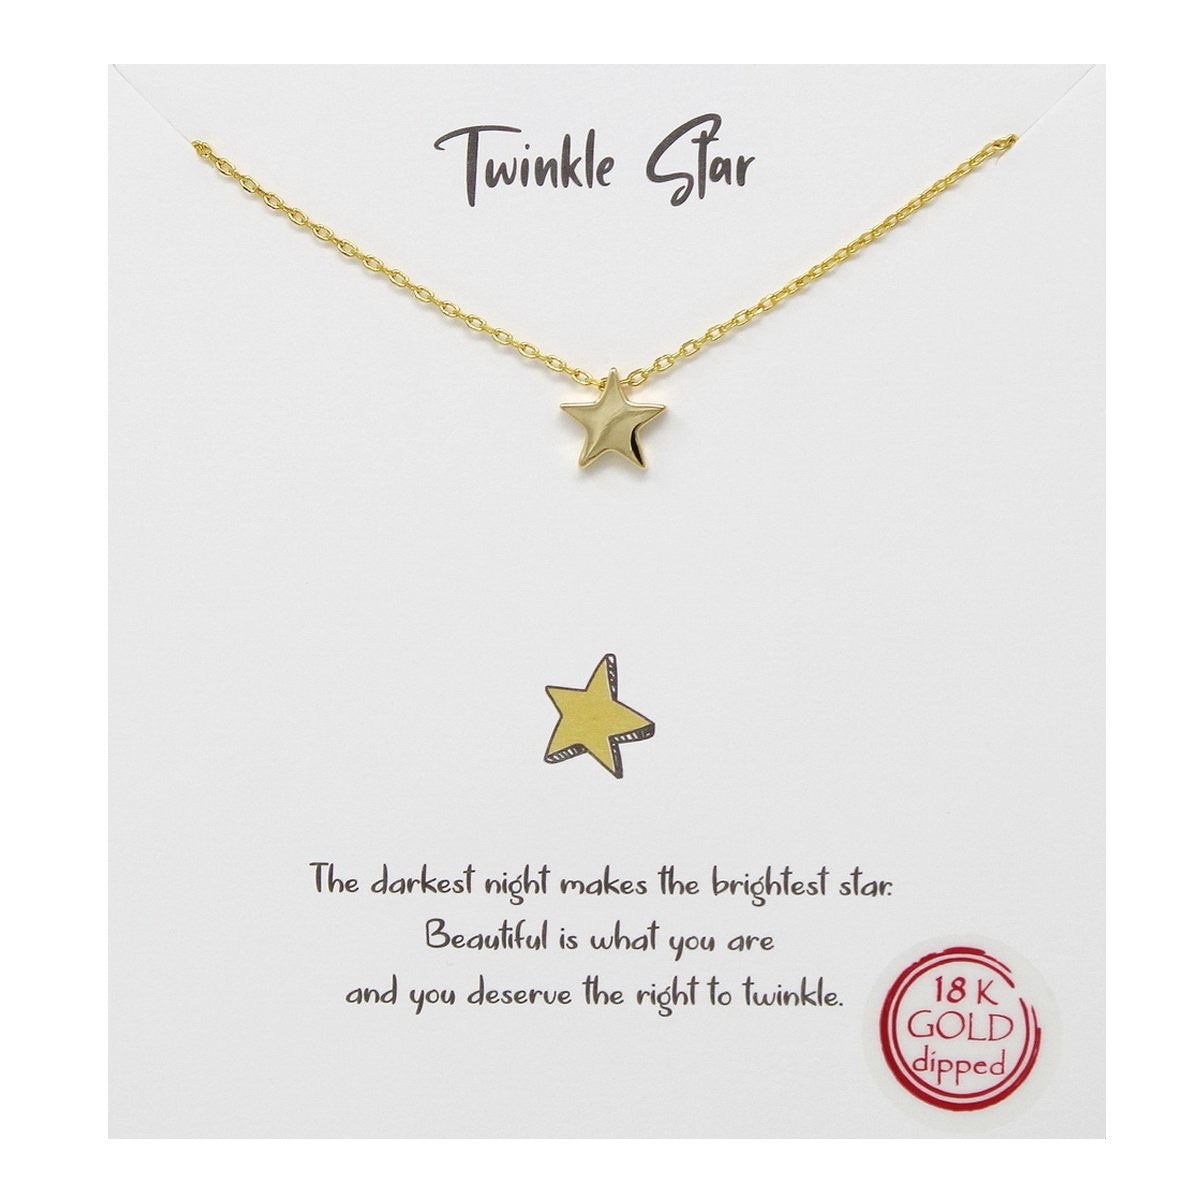 Twinkle Star 18 K Gold Dipped Necklace